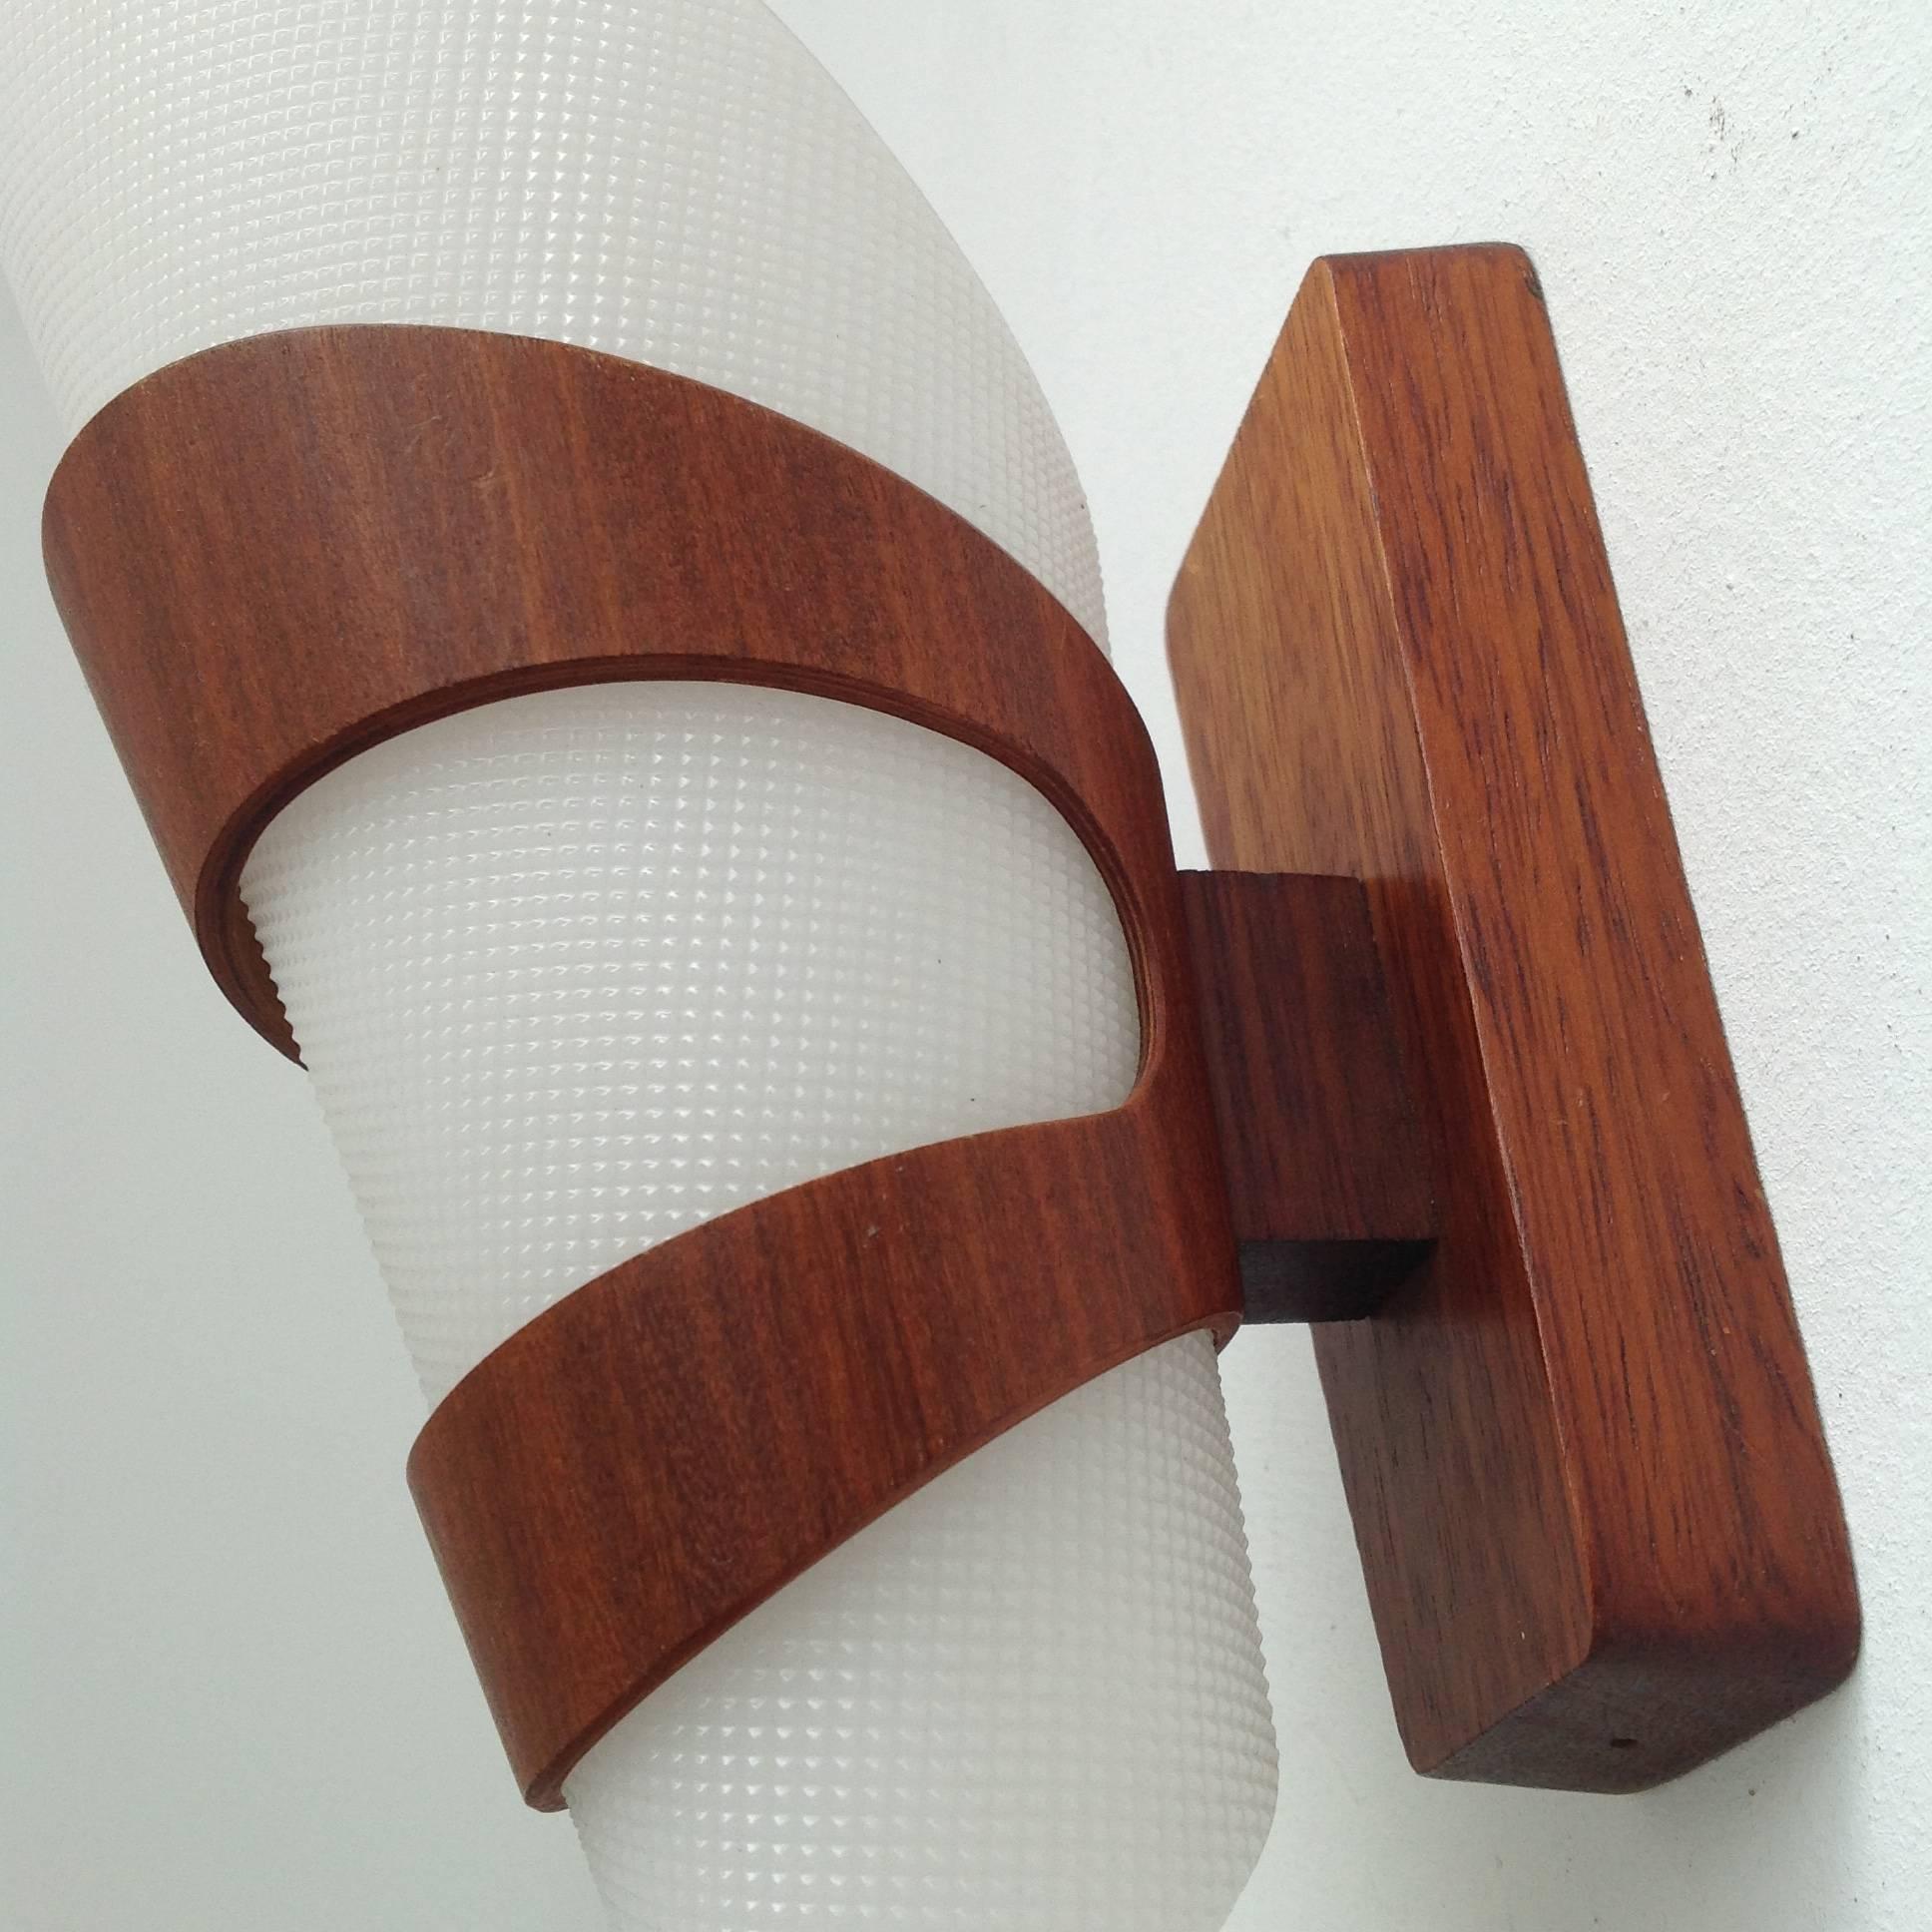 Beautiful handmade wall lamps from solid teak and plywood.
The cone lamp shades are made of engraved plexiglass.
The two original E14 sockets are completely checked and the wiring is replaced and ok for the US.

More pictures and with a higher